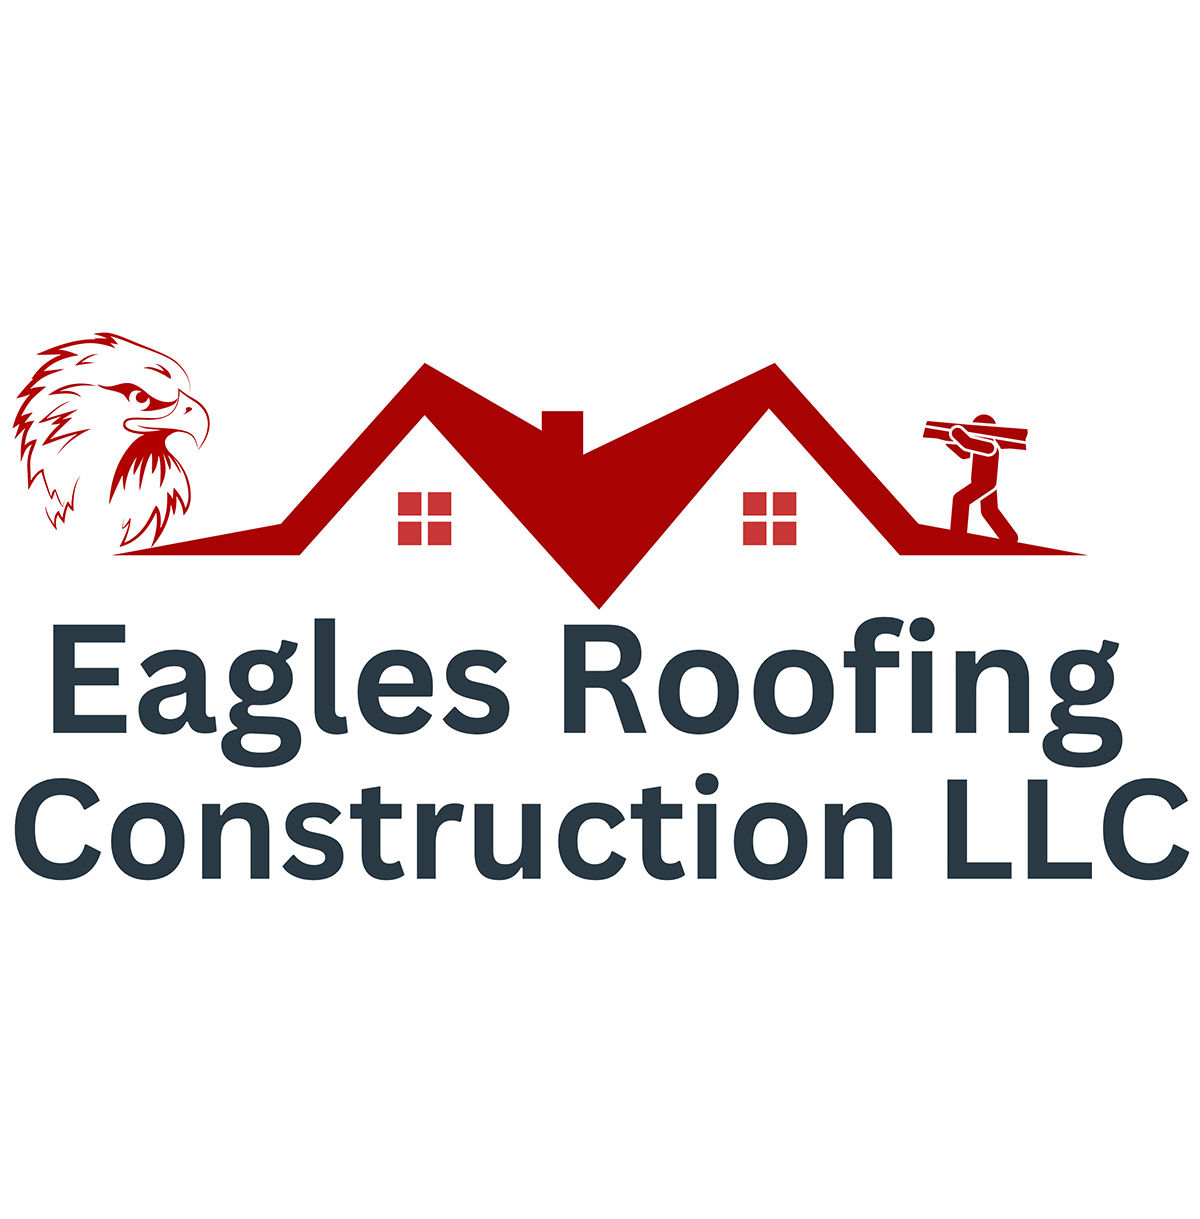 Eagles Roofing Construction LLC